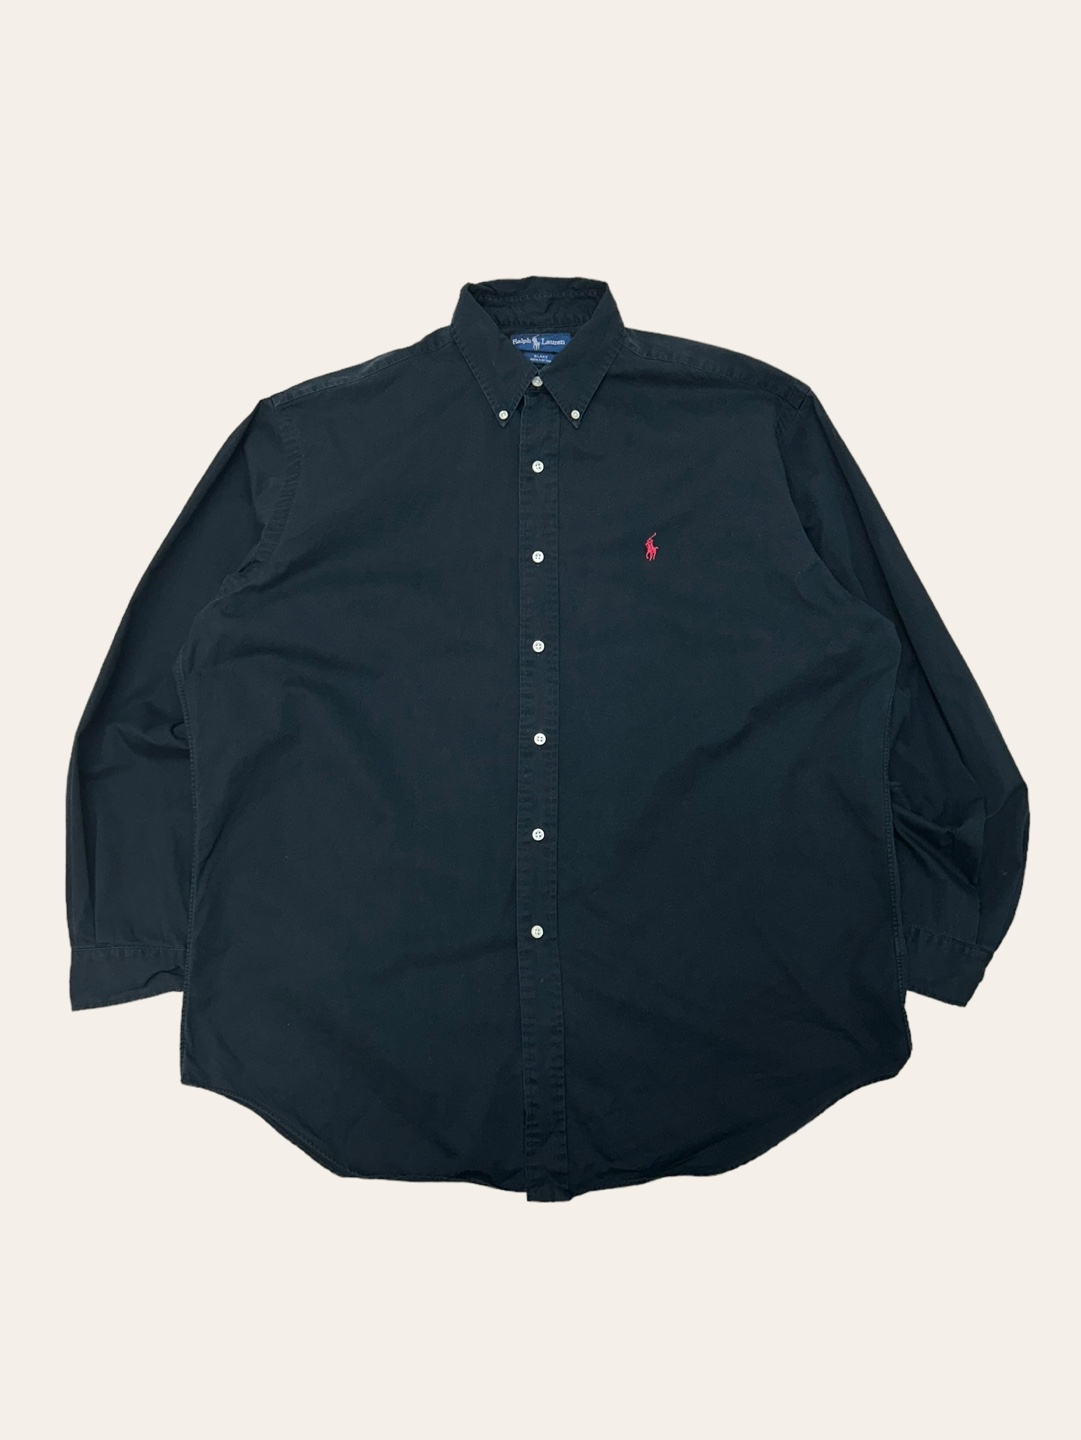 (From USA)Polo ralph lauren black solid shirt L